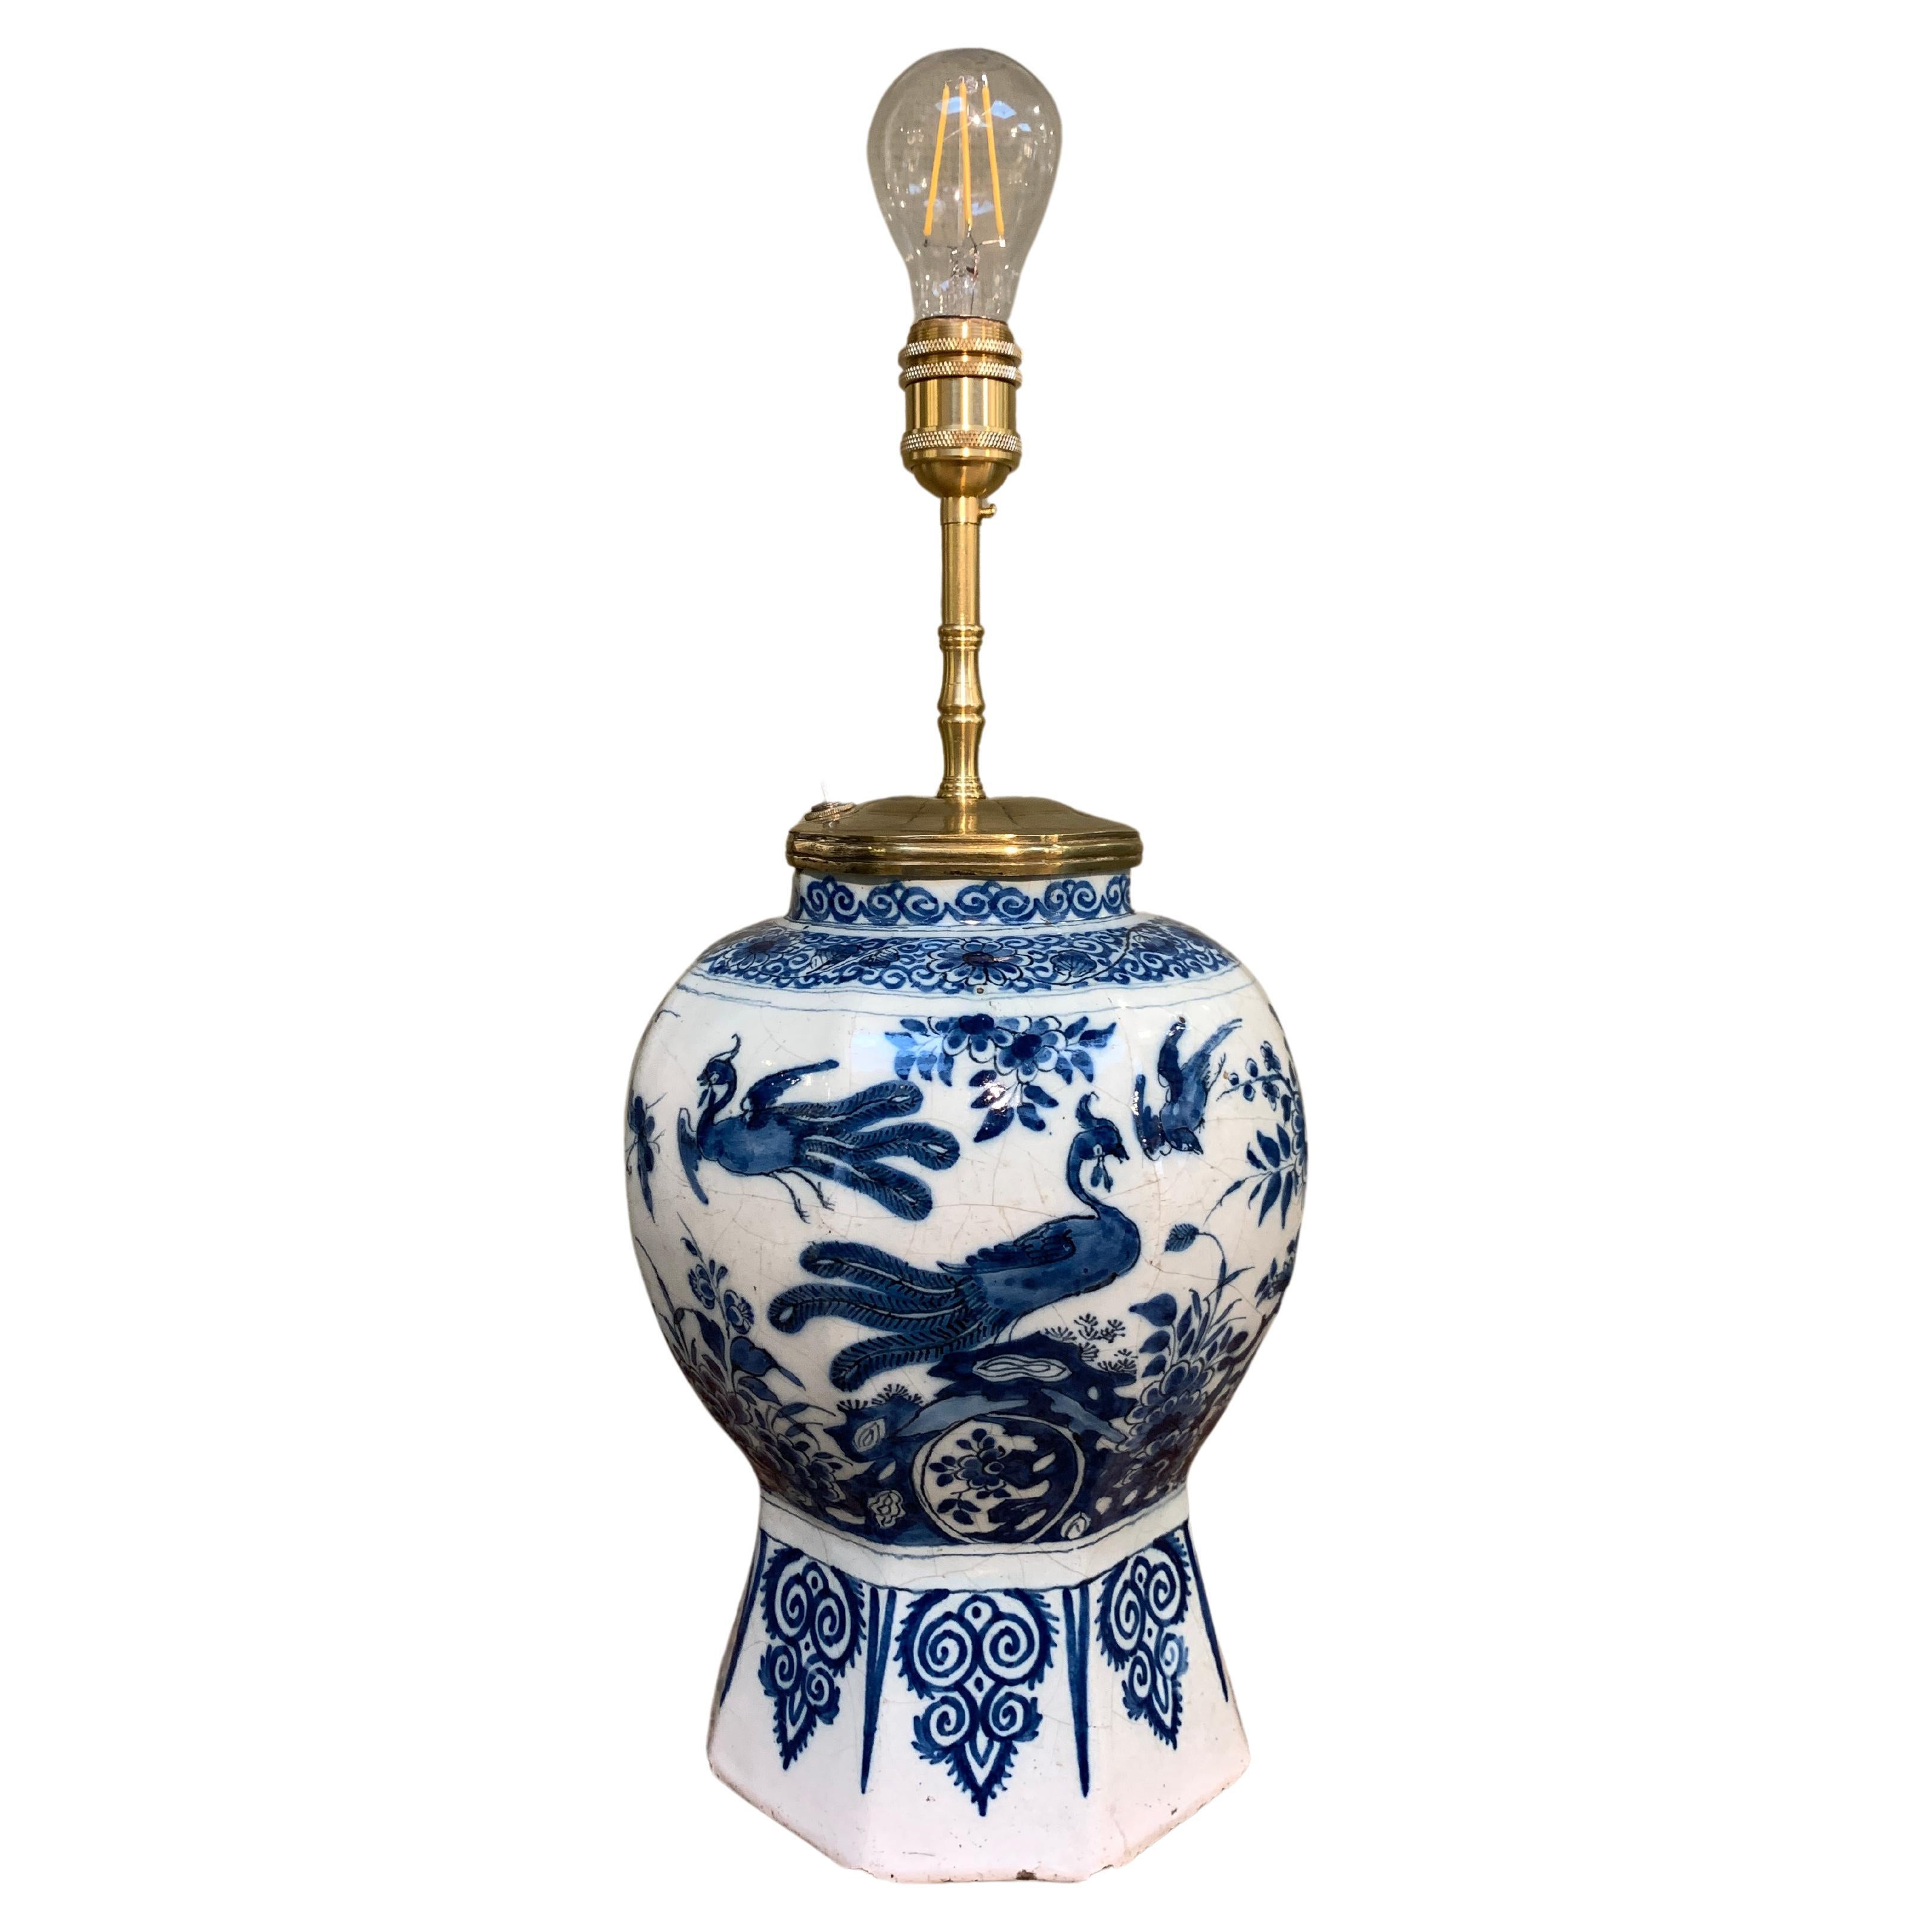 Early 18th Century Dutch Delft Vase Converted into a Lamp